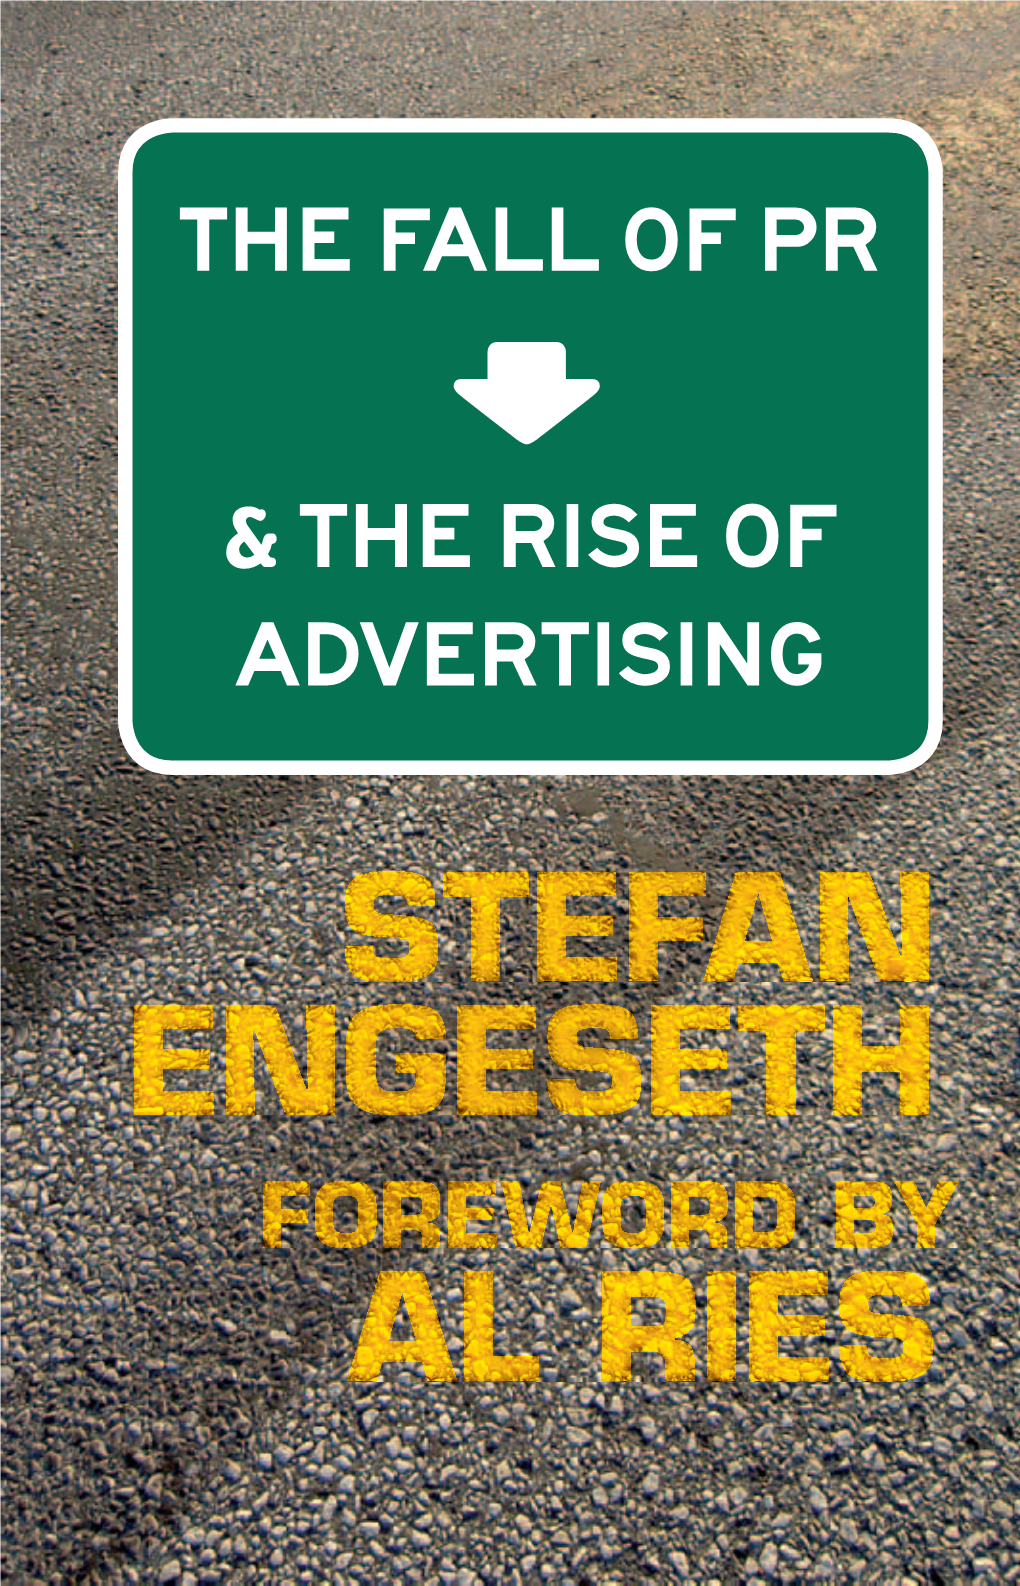 Book, the Fall of Advertising and the Rise of PR, Shook the Advertising Industry to the Bone